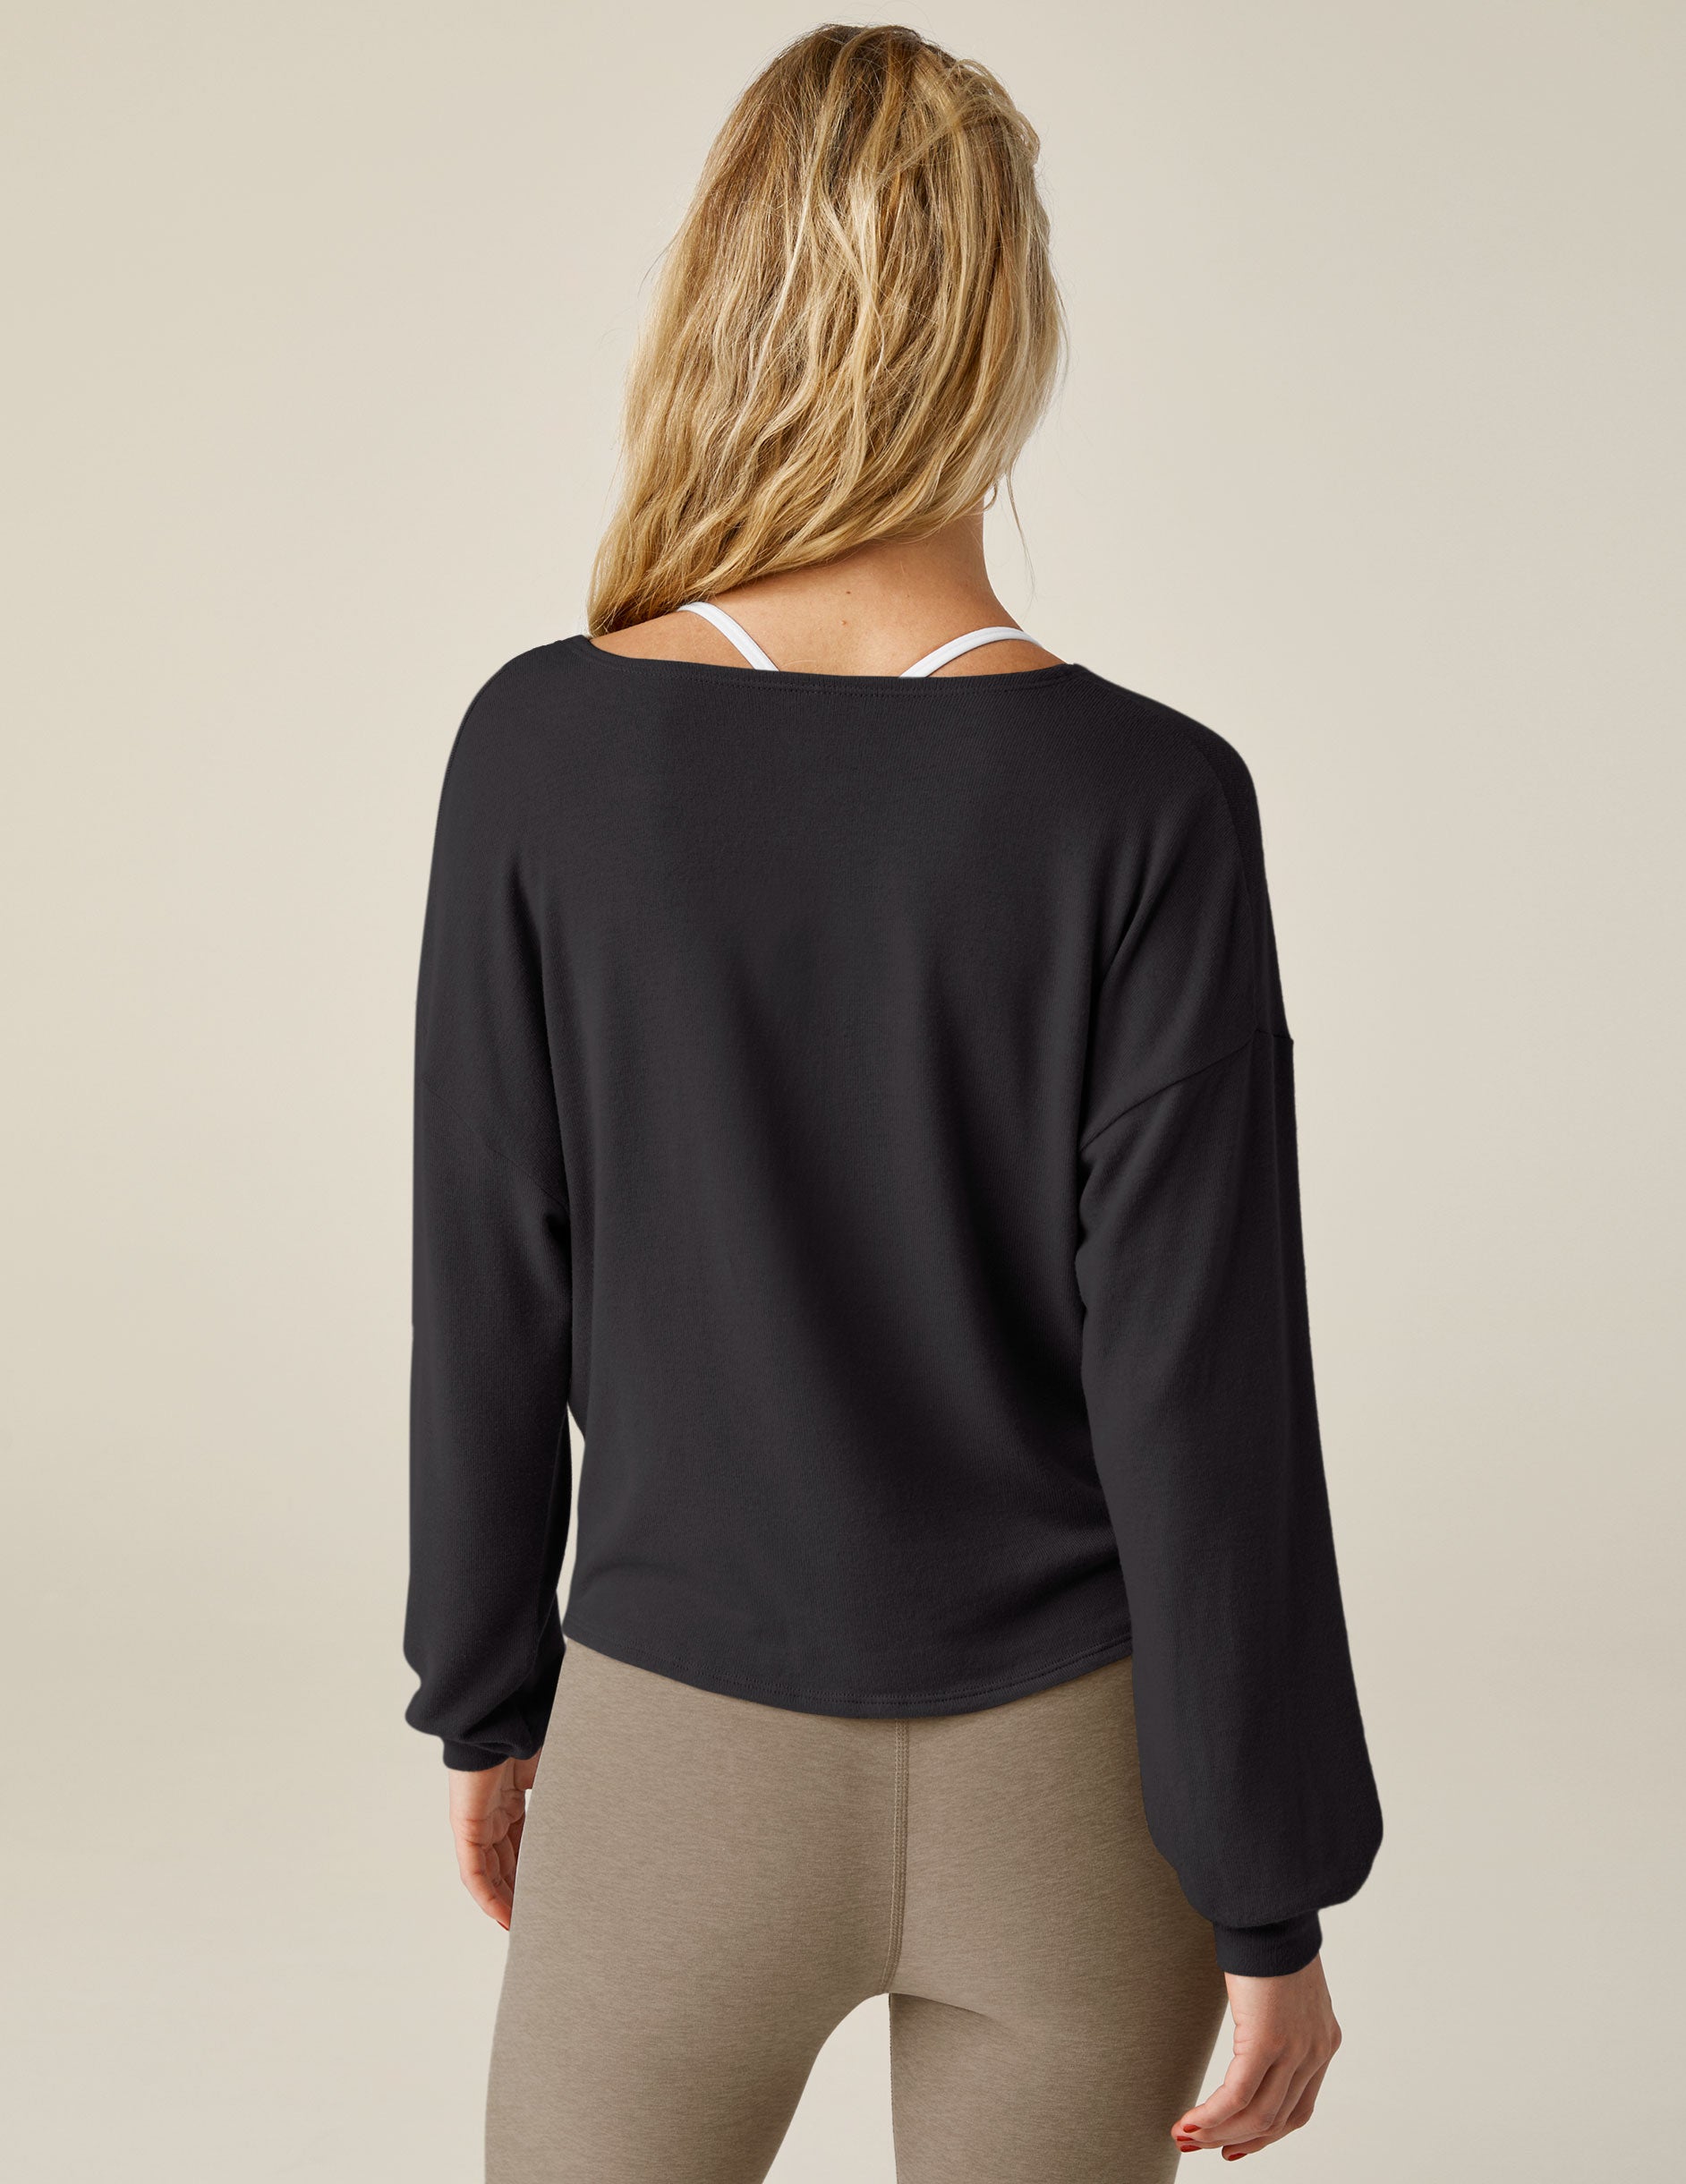 black v neck long sleeve top with twist front detail